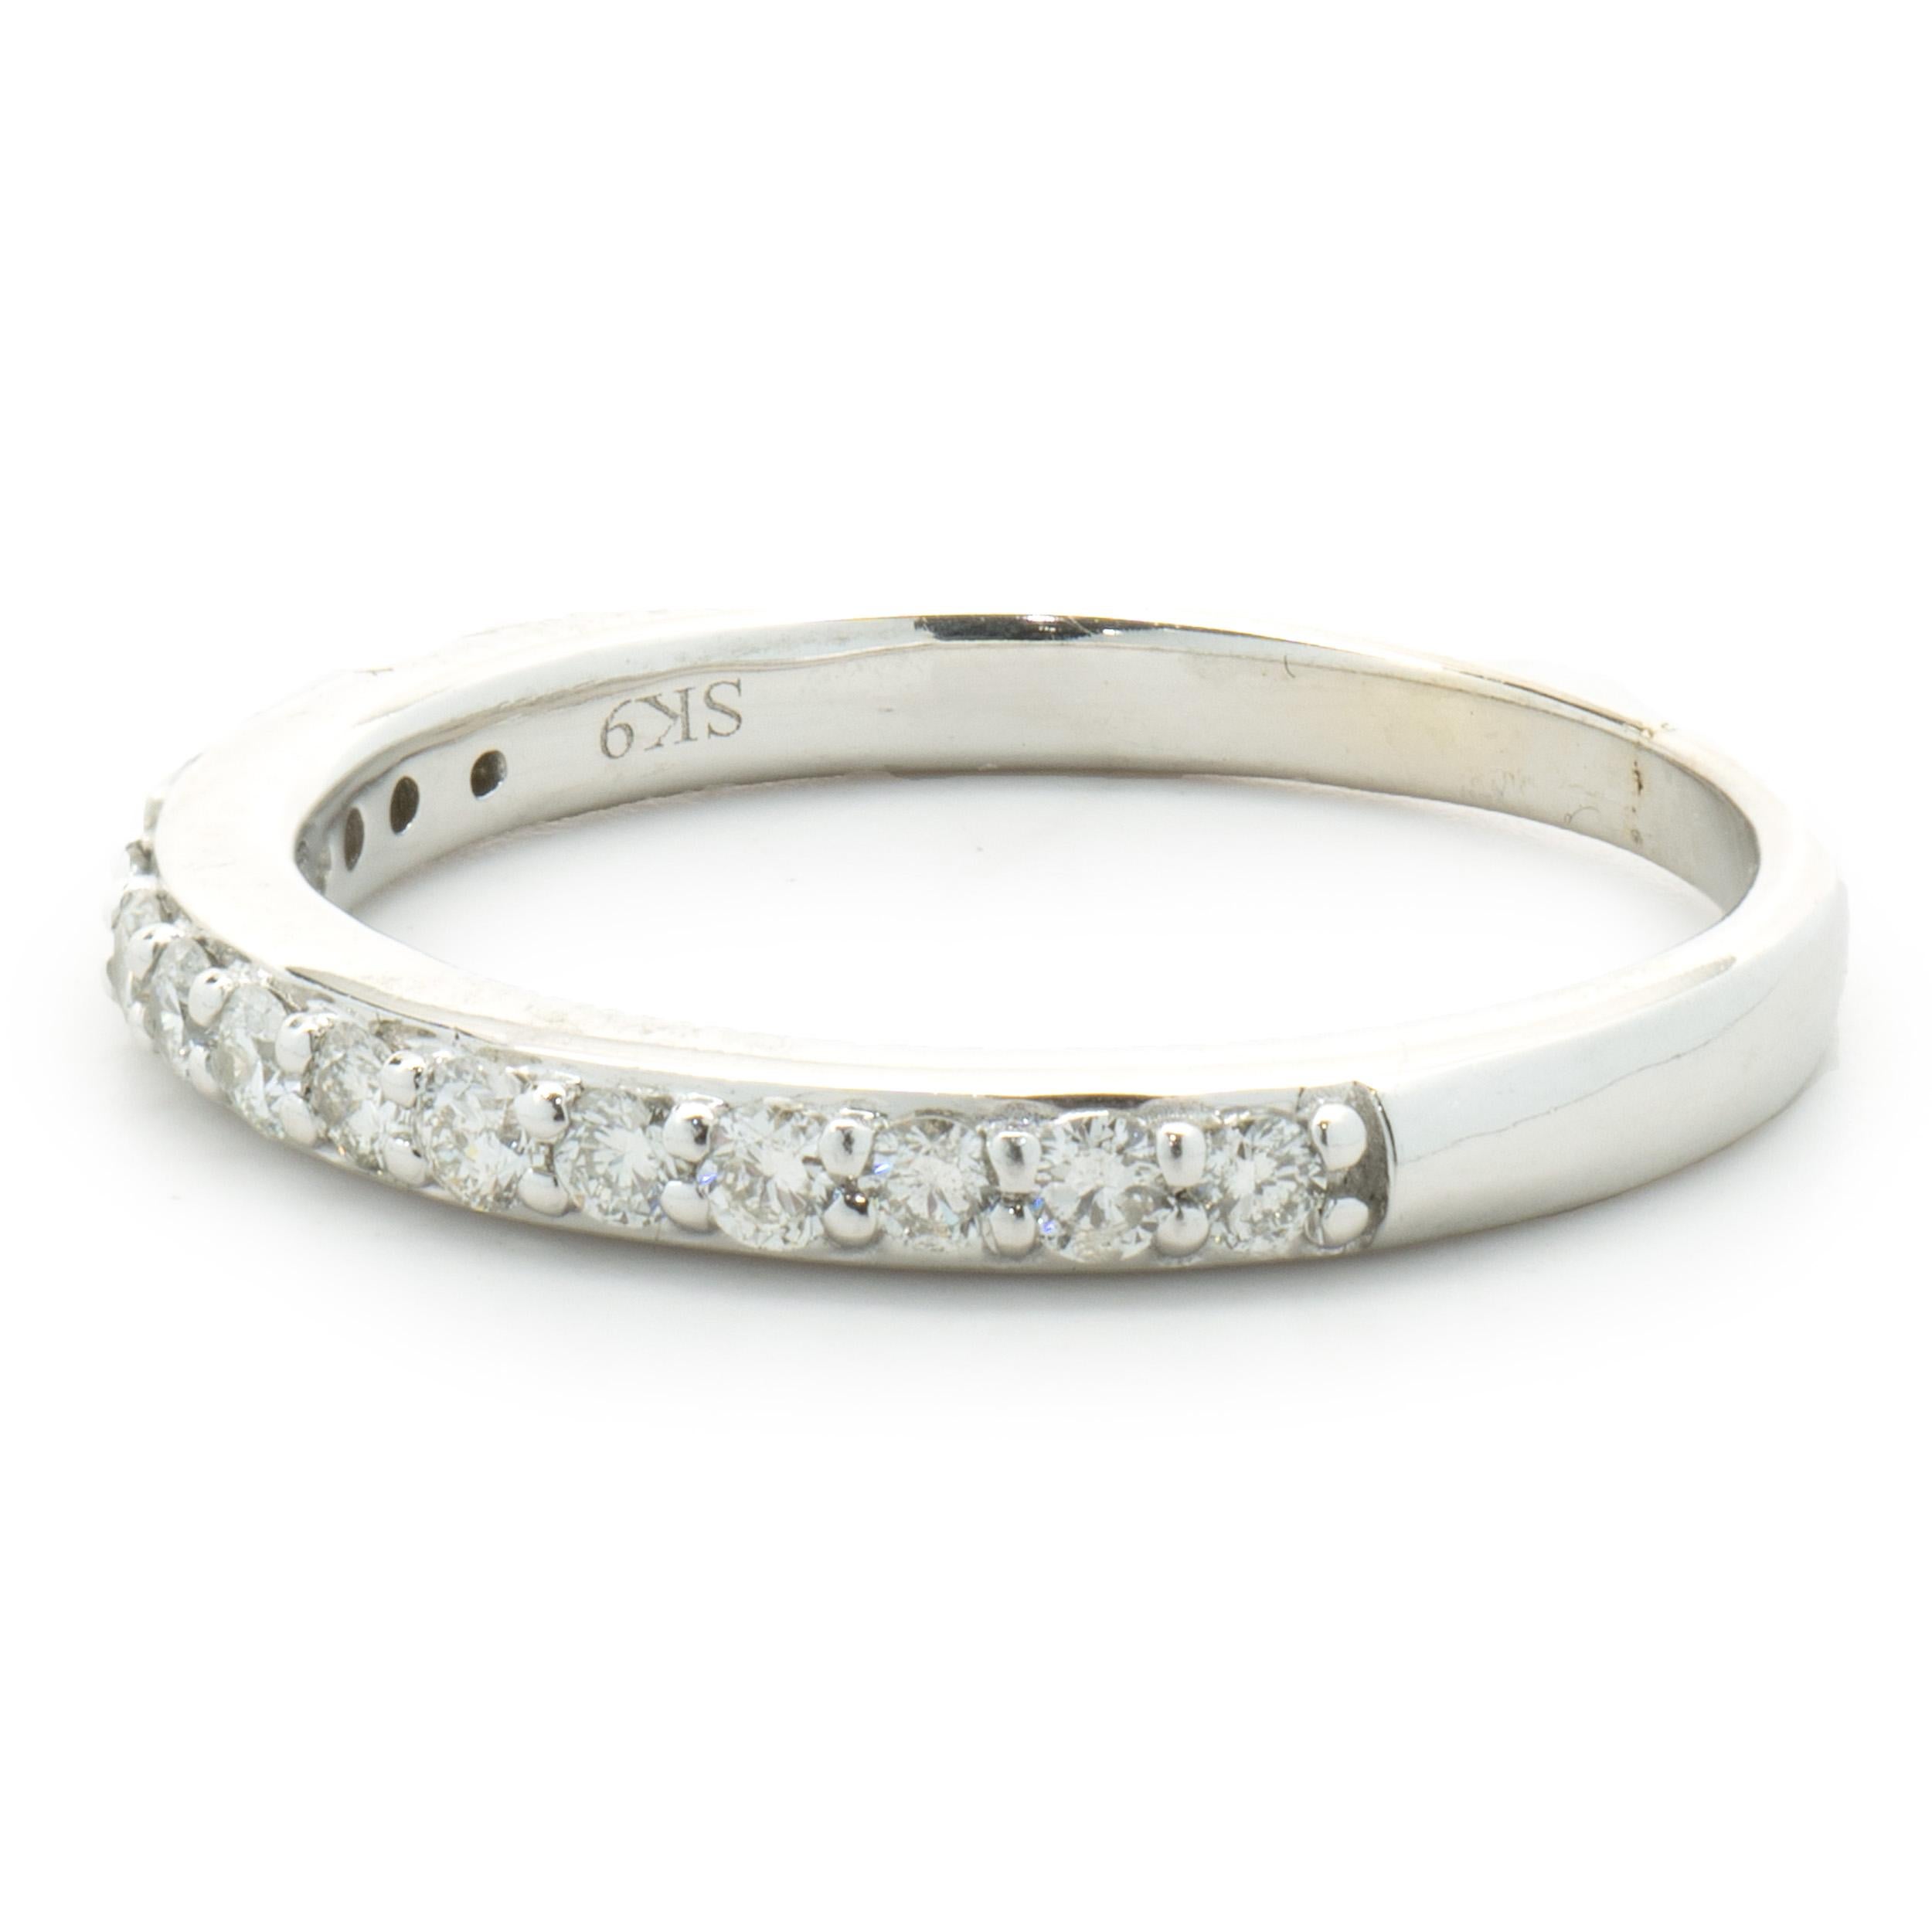 Designer: Custom
Material: 14K white gold
Diamonds: 15 round brilliant cut = 0.15cttw
Color: G 
Clarity: SI1
Size: 5.25 sizing available 
Dimensions: ring measures 2mm in width
Weight: 2.15 grams